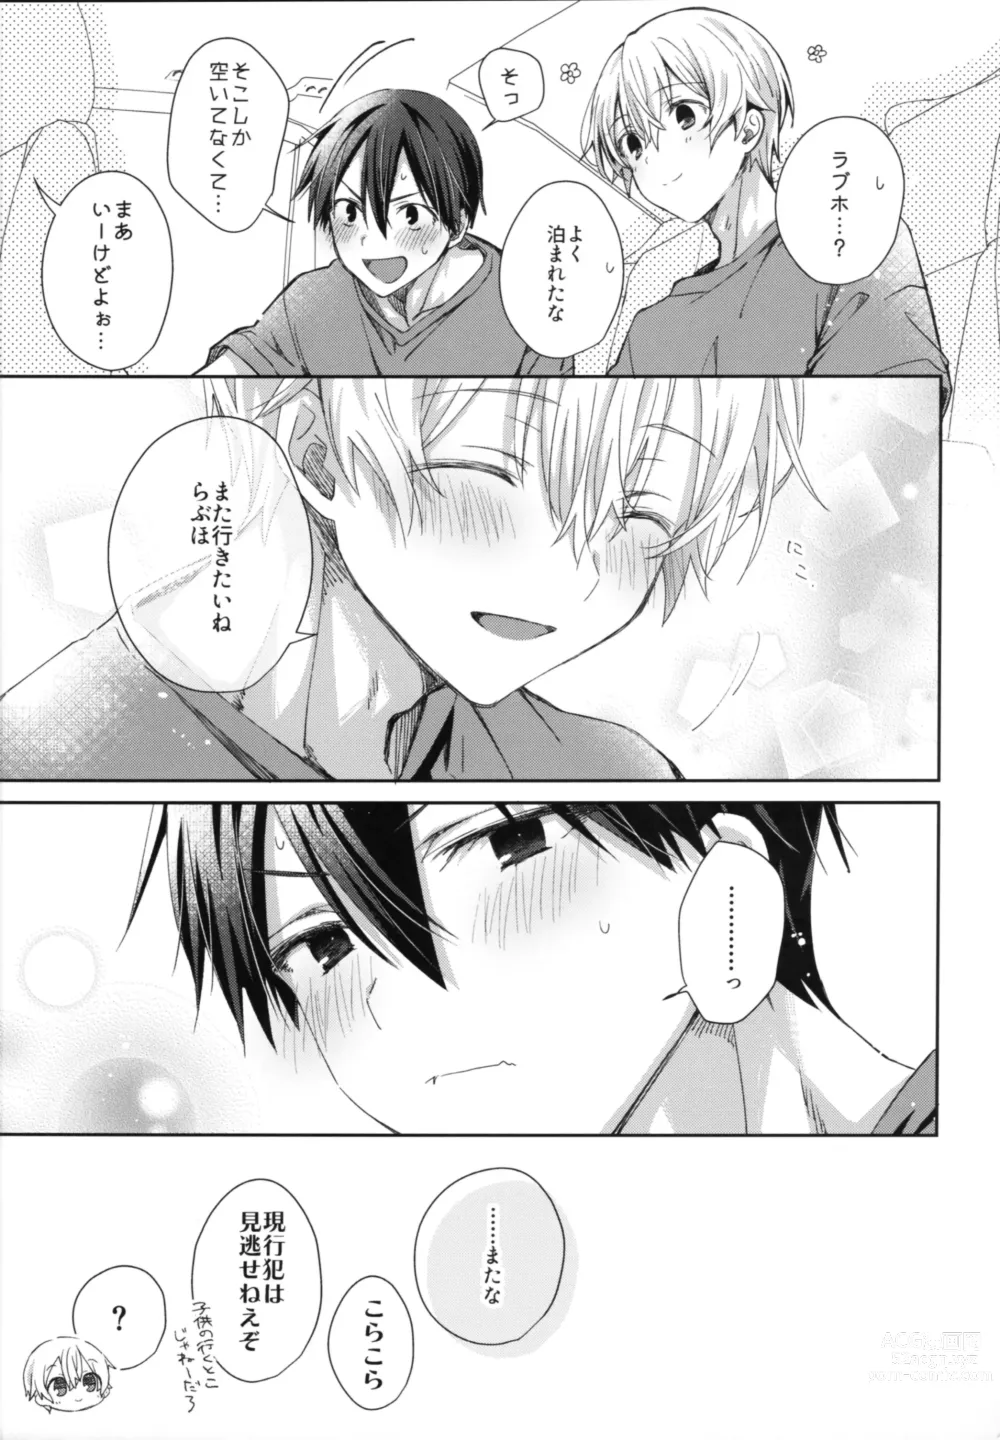 Page 26 of doujinshi Adolescent Summer